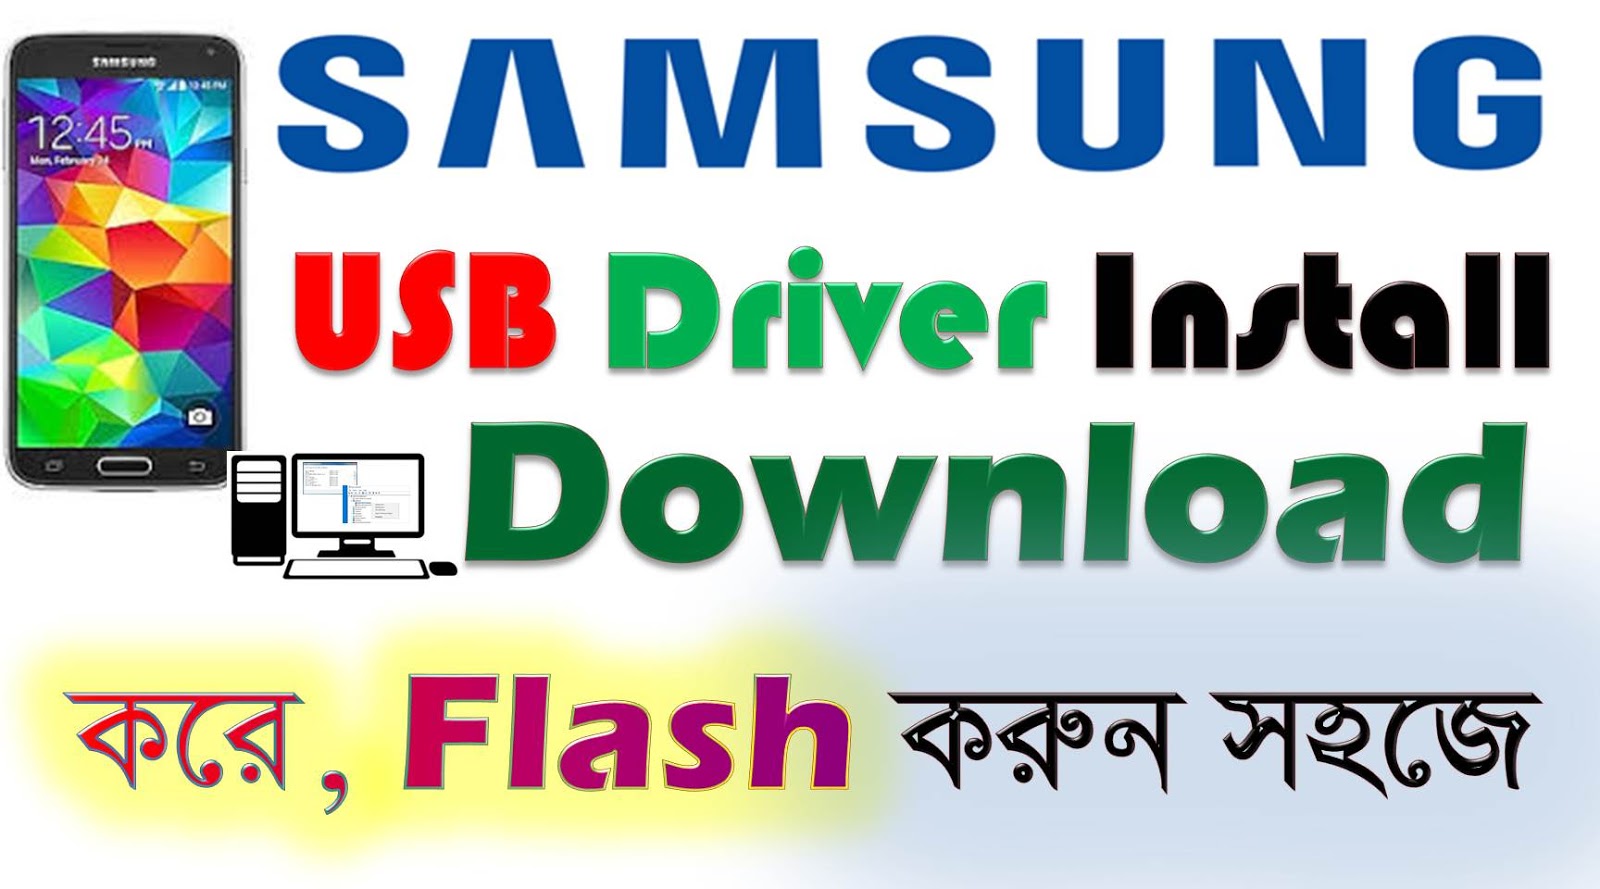 Samsung-Usb-Driver-v1.5.61.0-1 Free Download Without ...